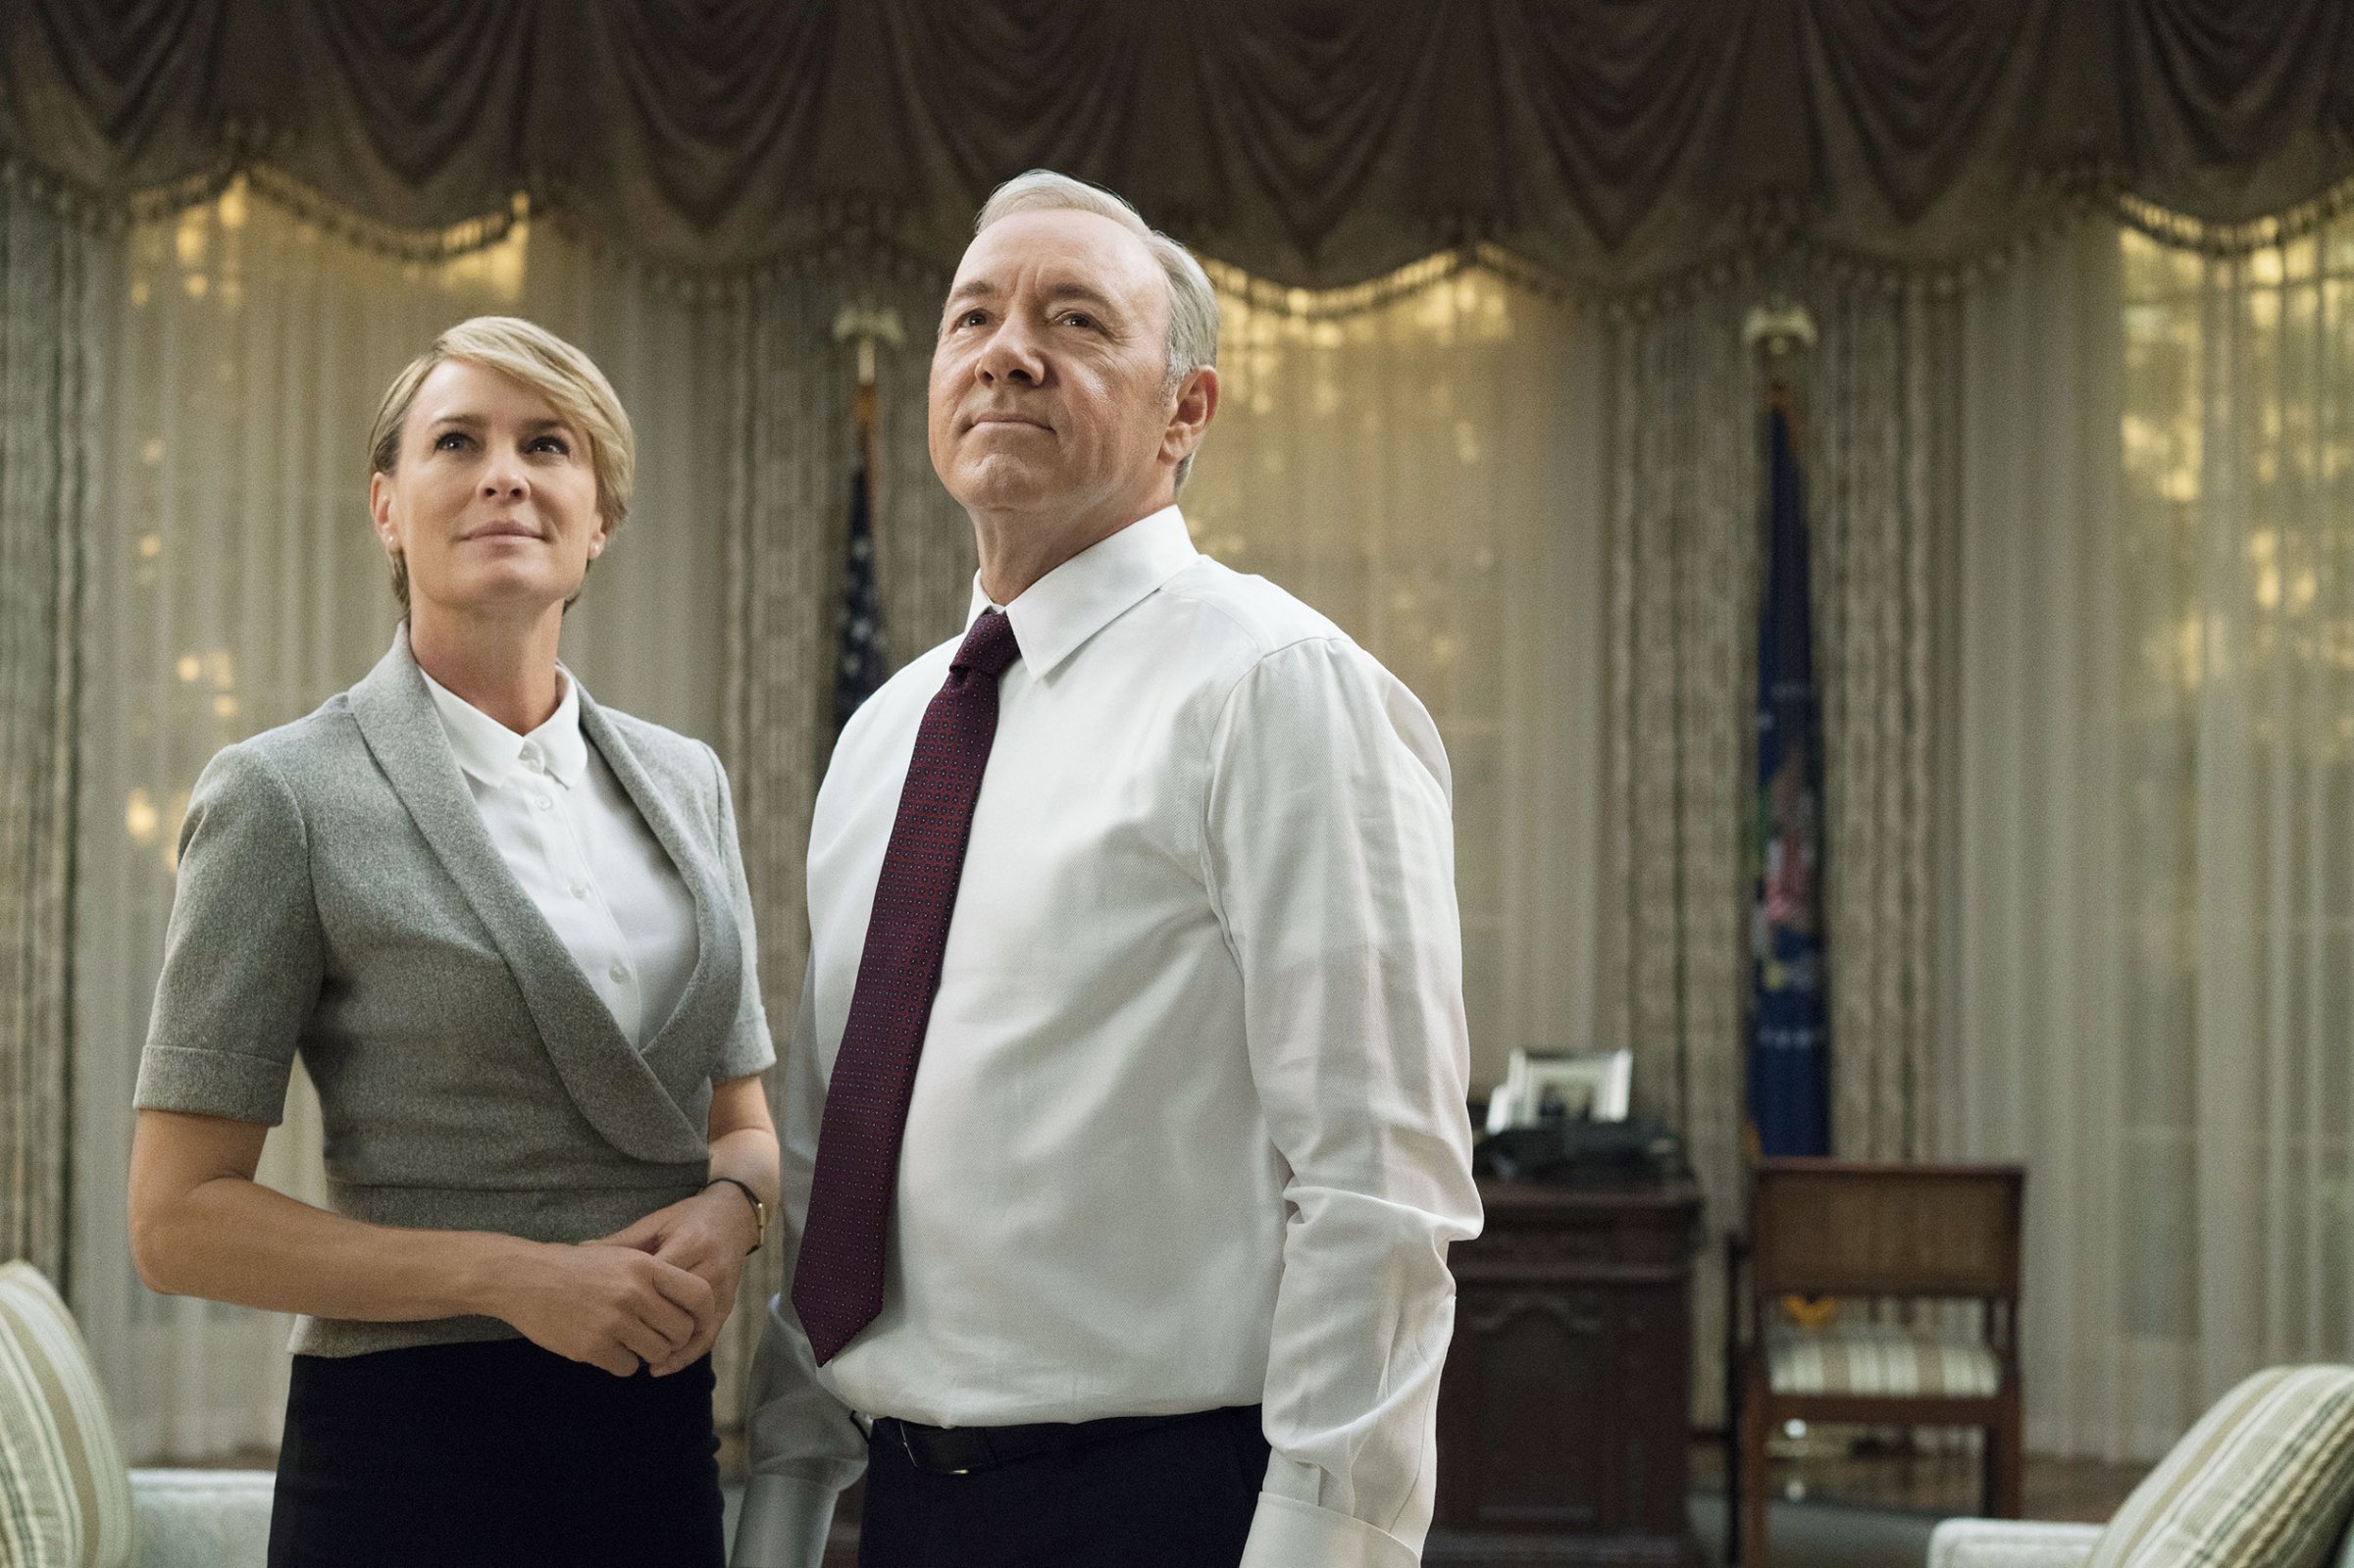 house-of-cards-netflix-robin-wright-kevin-spacey